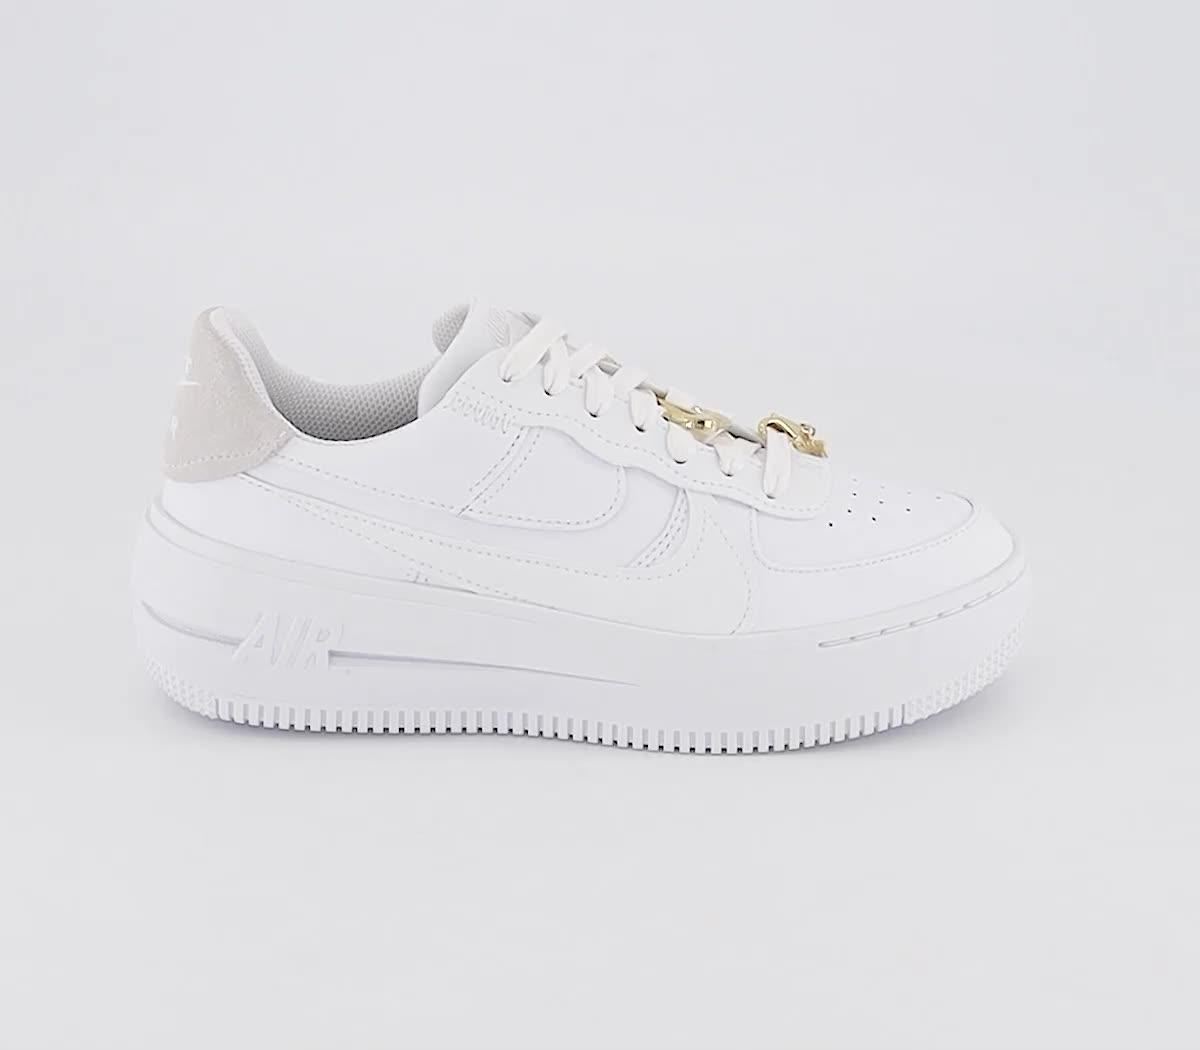 Toezicht houden poort De lucht Nike Air Force 1 PLT.AF.ORM Trainers White Summit White Metallic Gold -  Women's Trainers